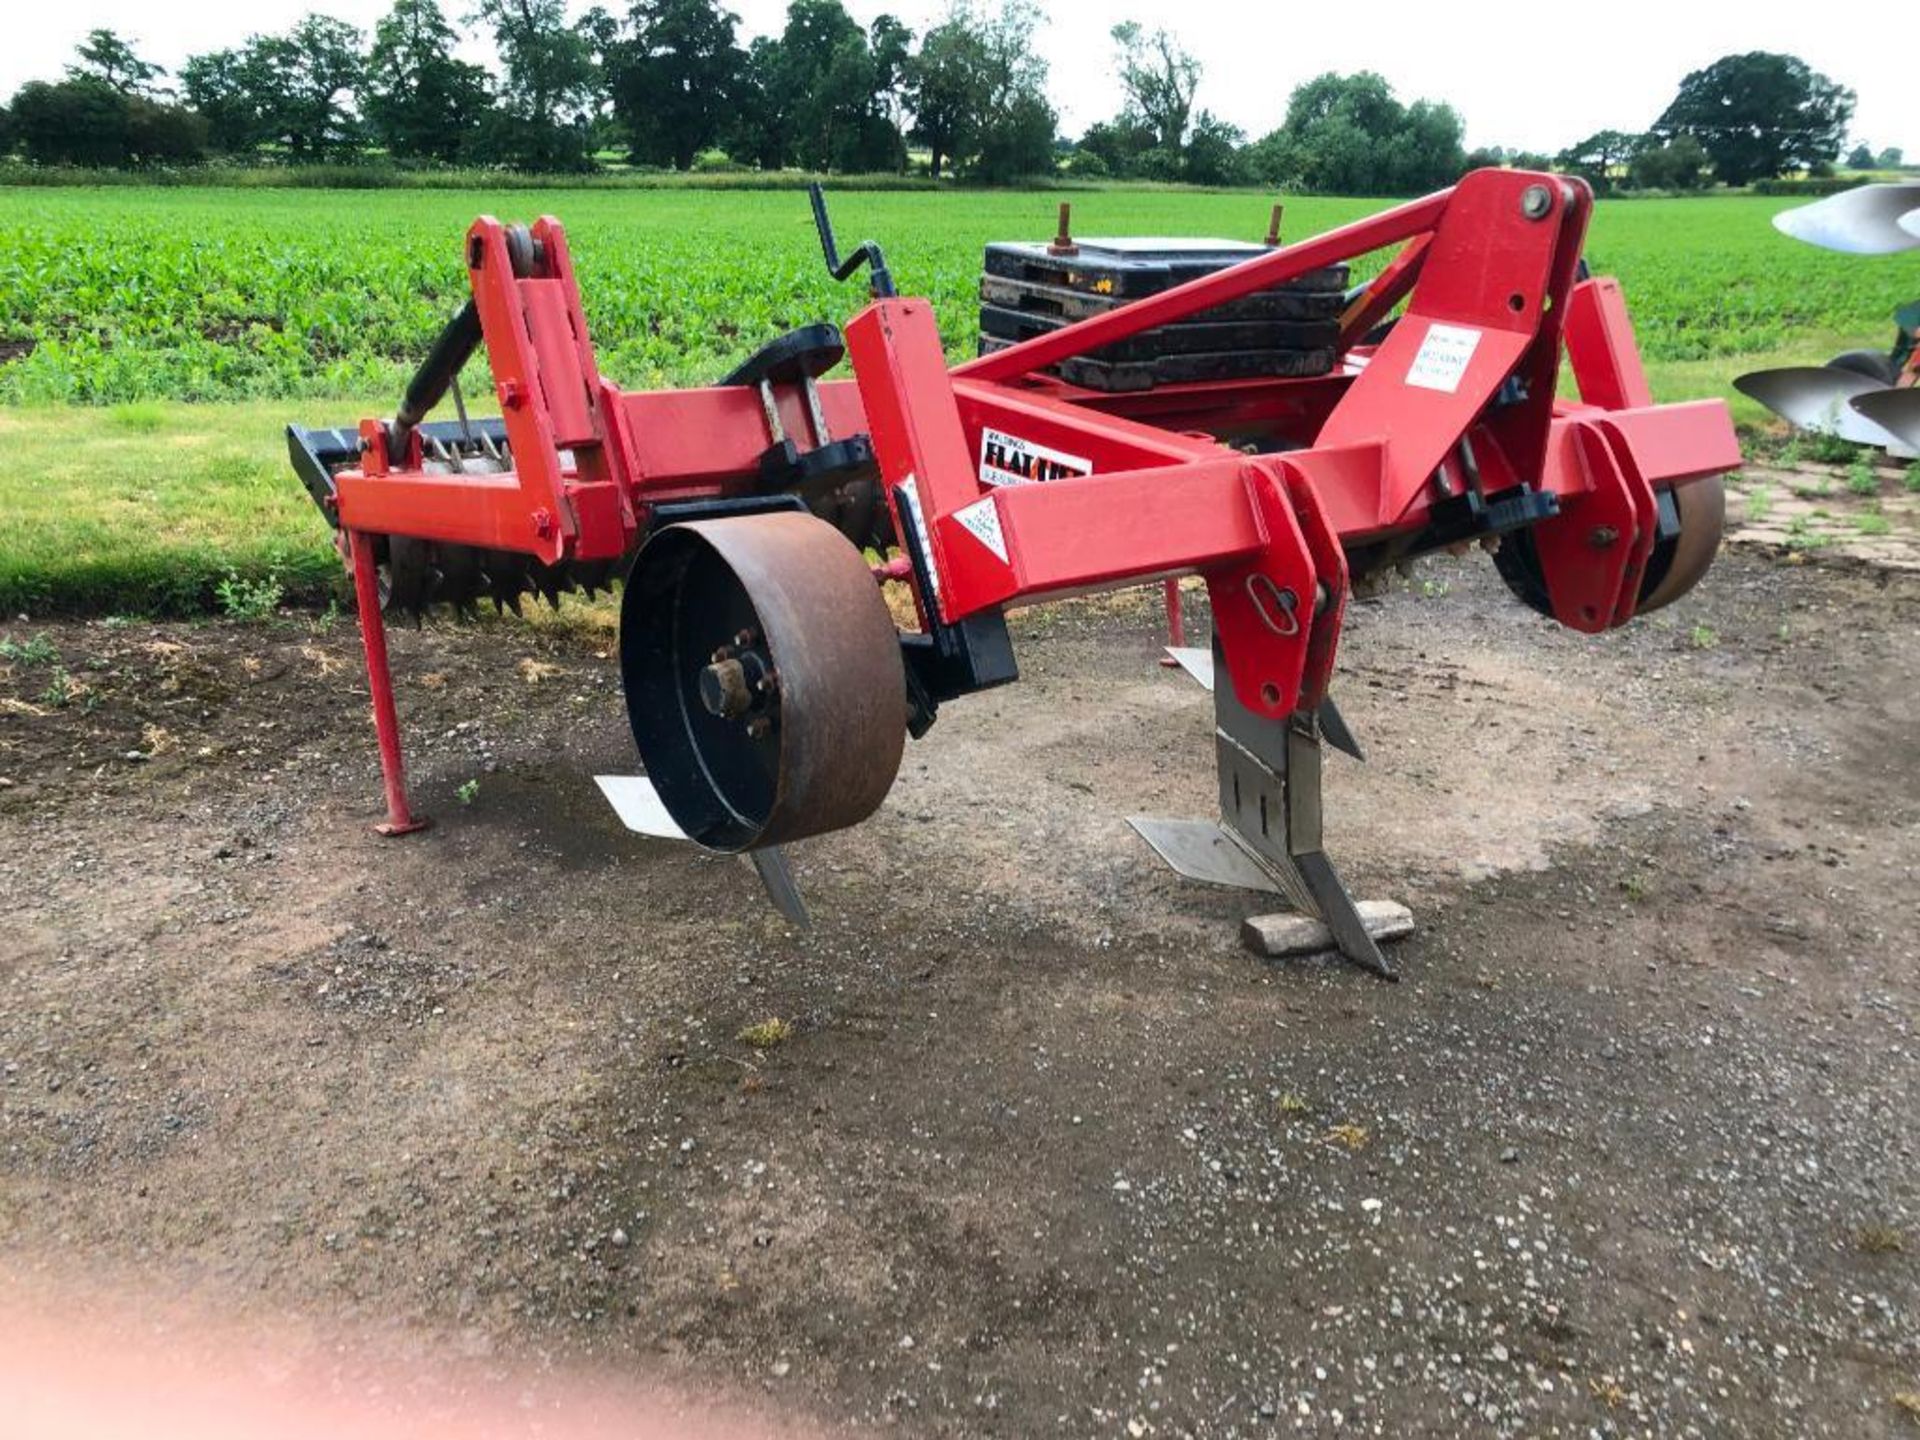 Spaldings 90/150 3 leg sub soiler with depth wheels, rear tooth packer, linkage mounted - Image 2 of 19